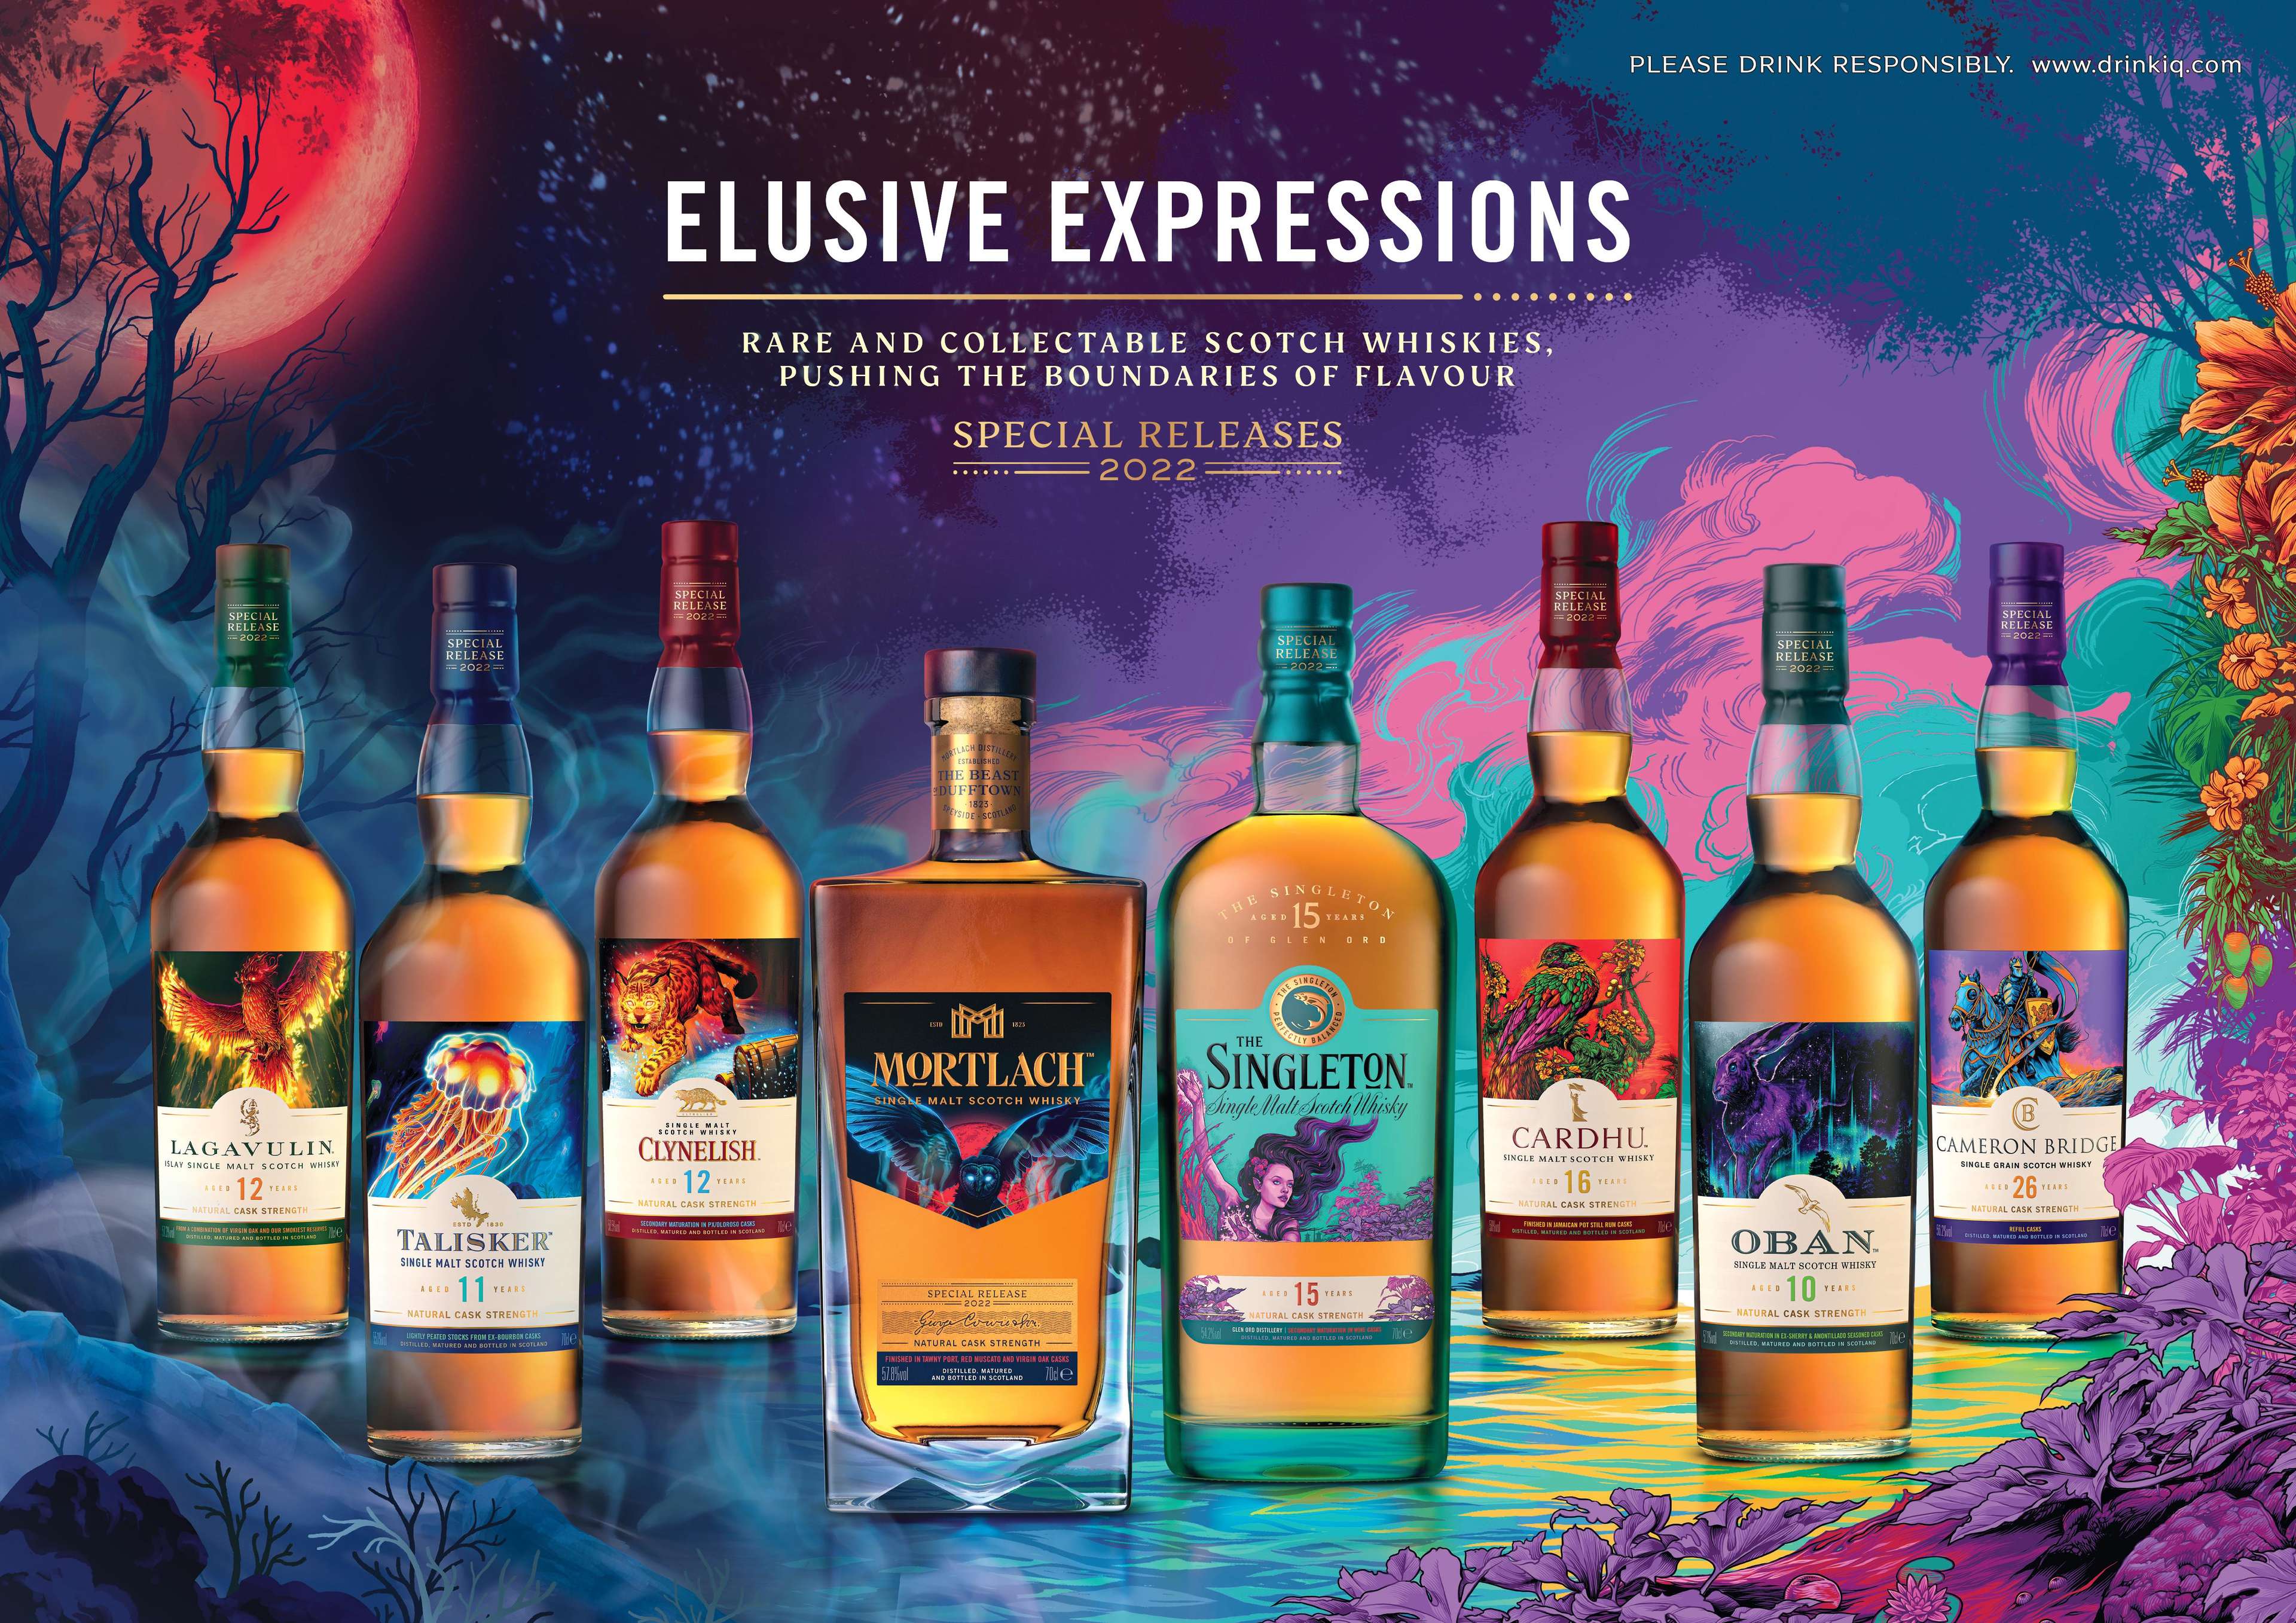 Diageo unveils 2022 Special Releases Whisky Collection